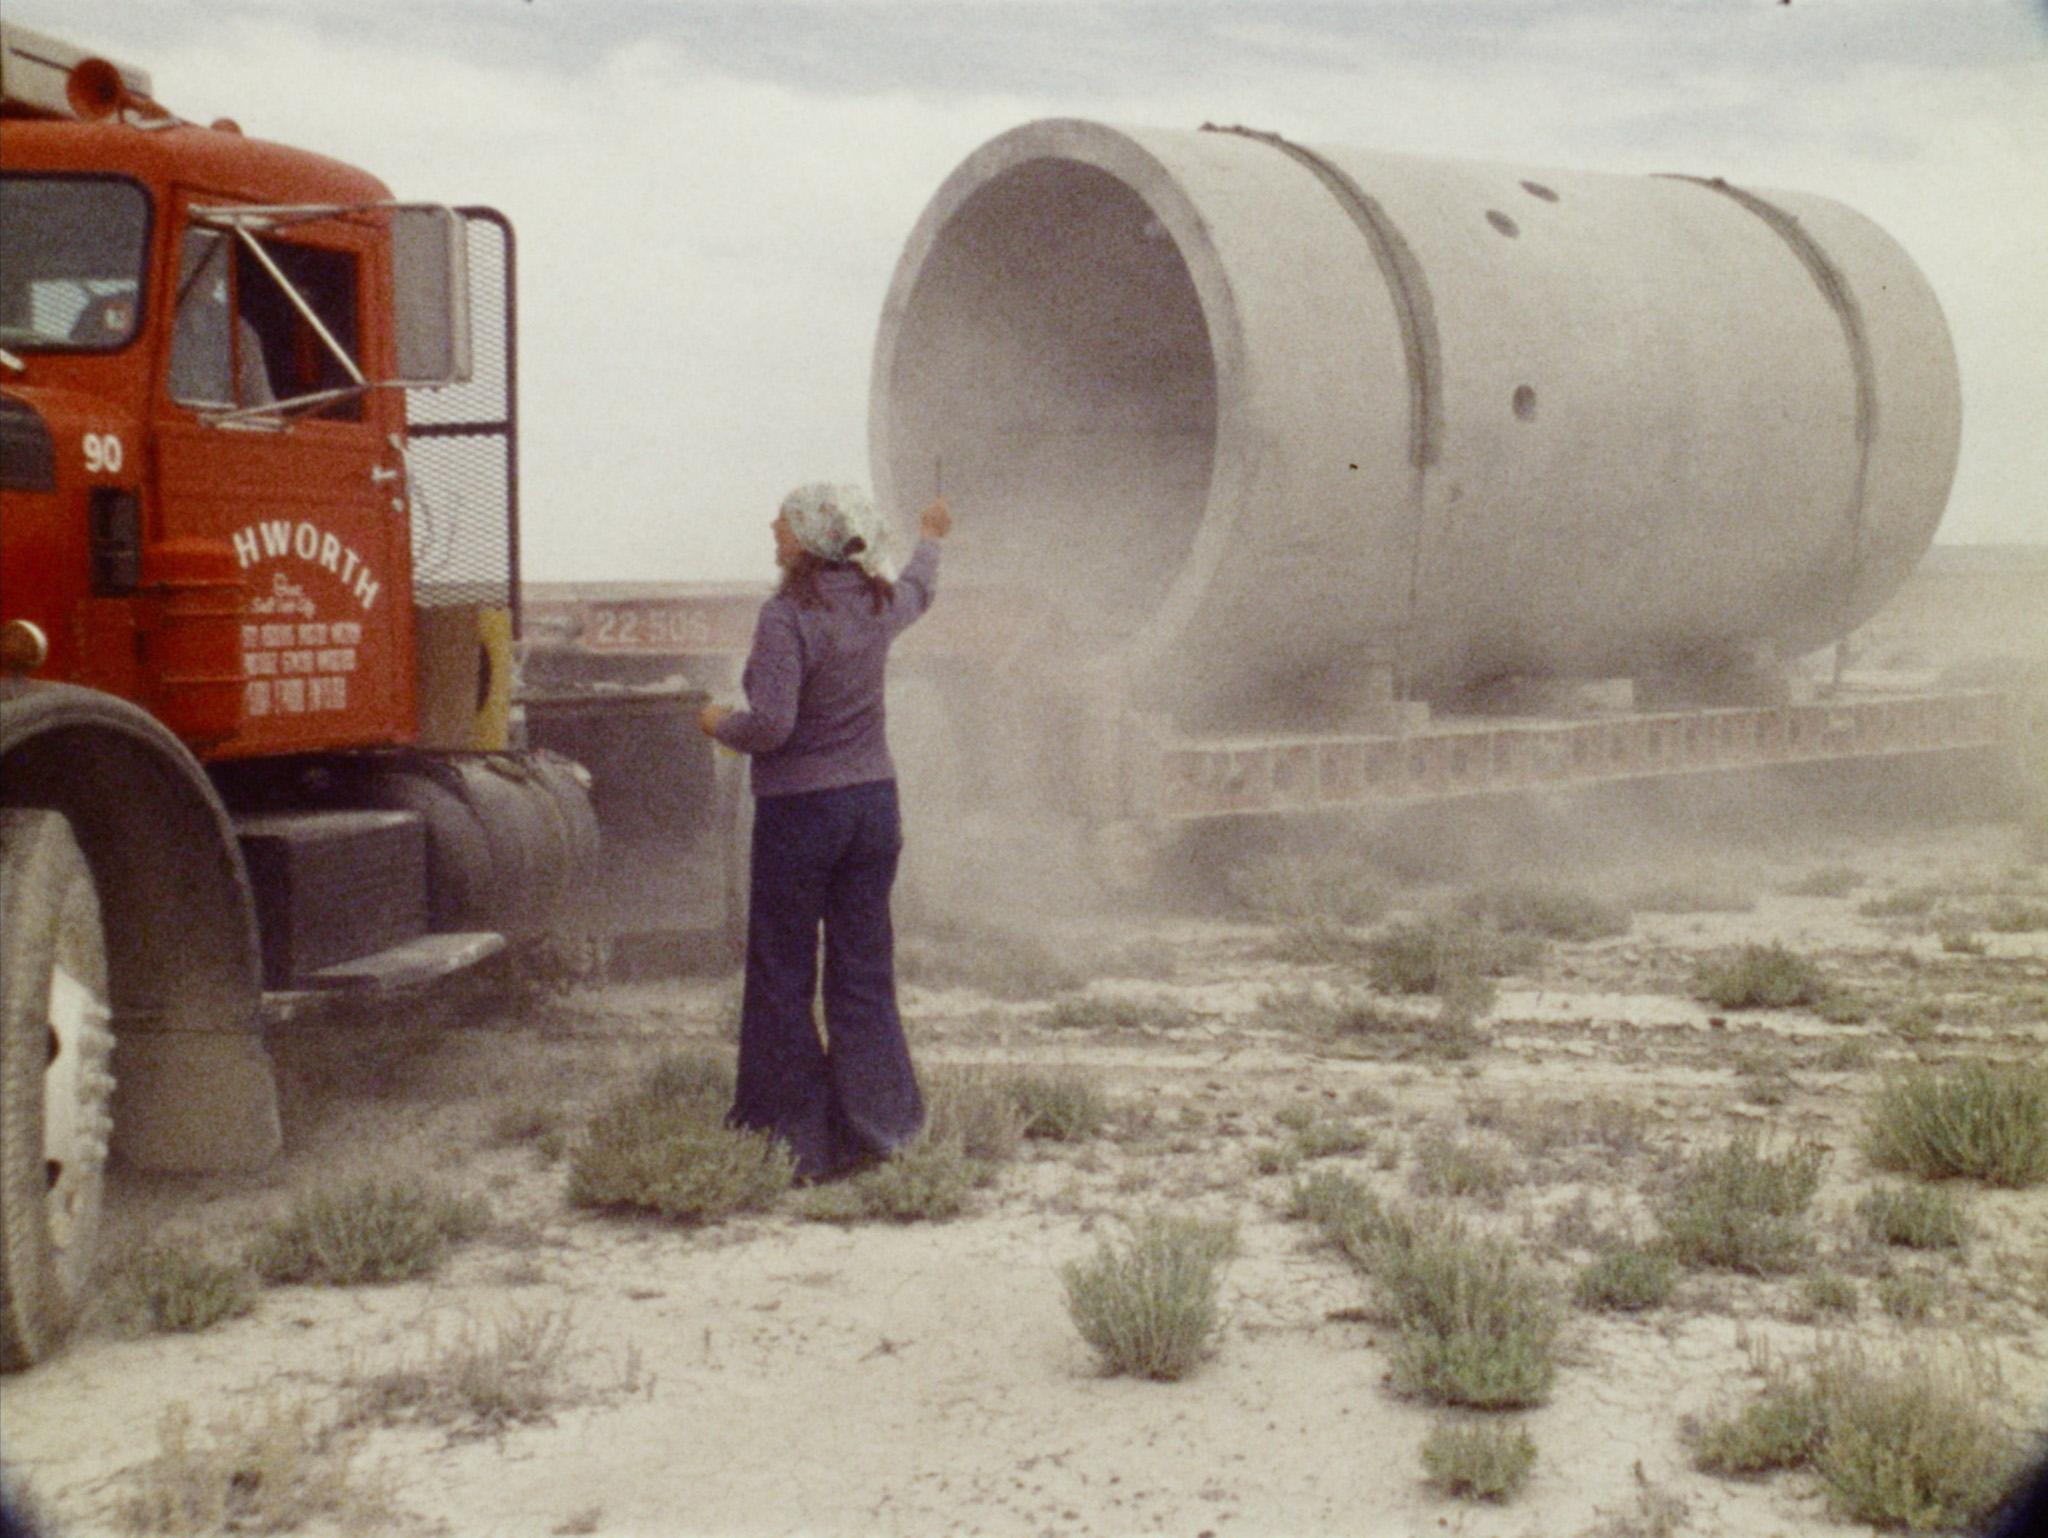 Still from Nancy Holt's film Sun Tunnels showing the construction of her earthwork